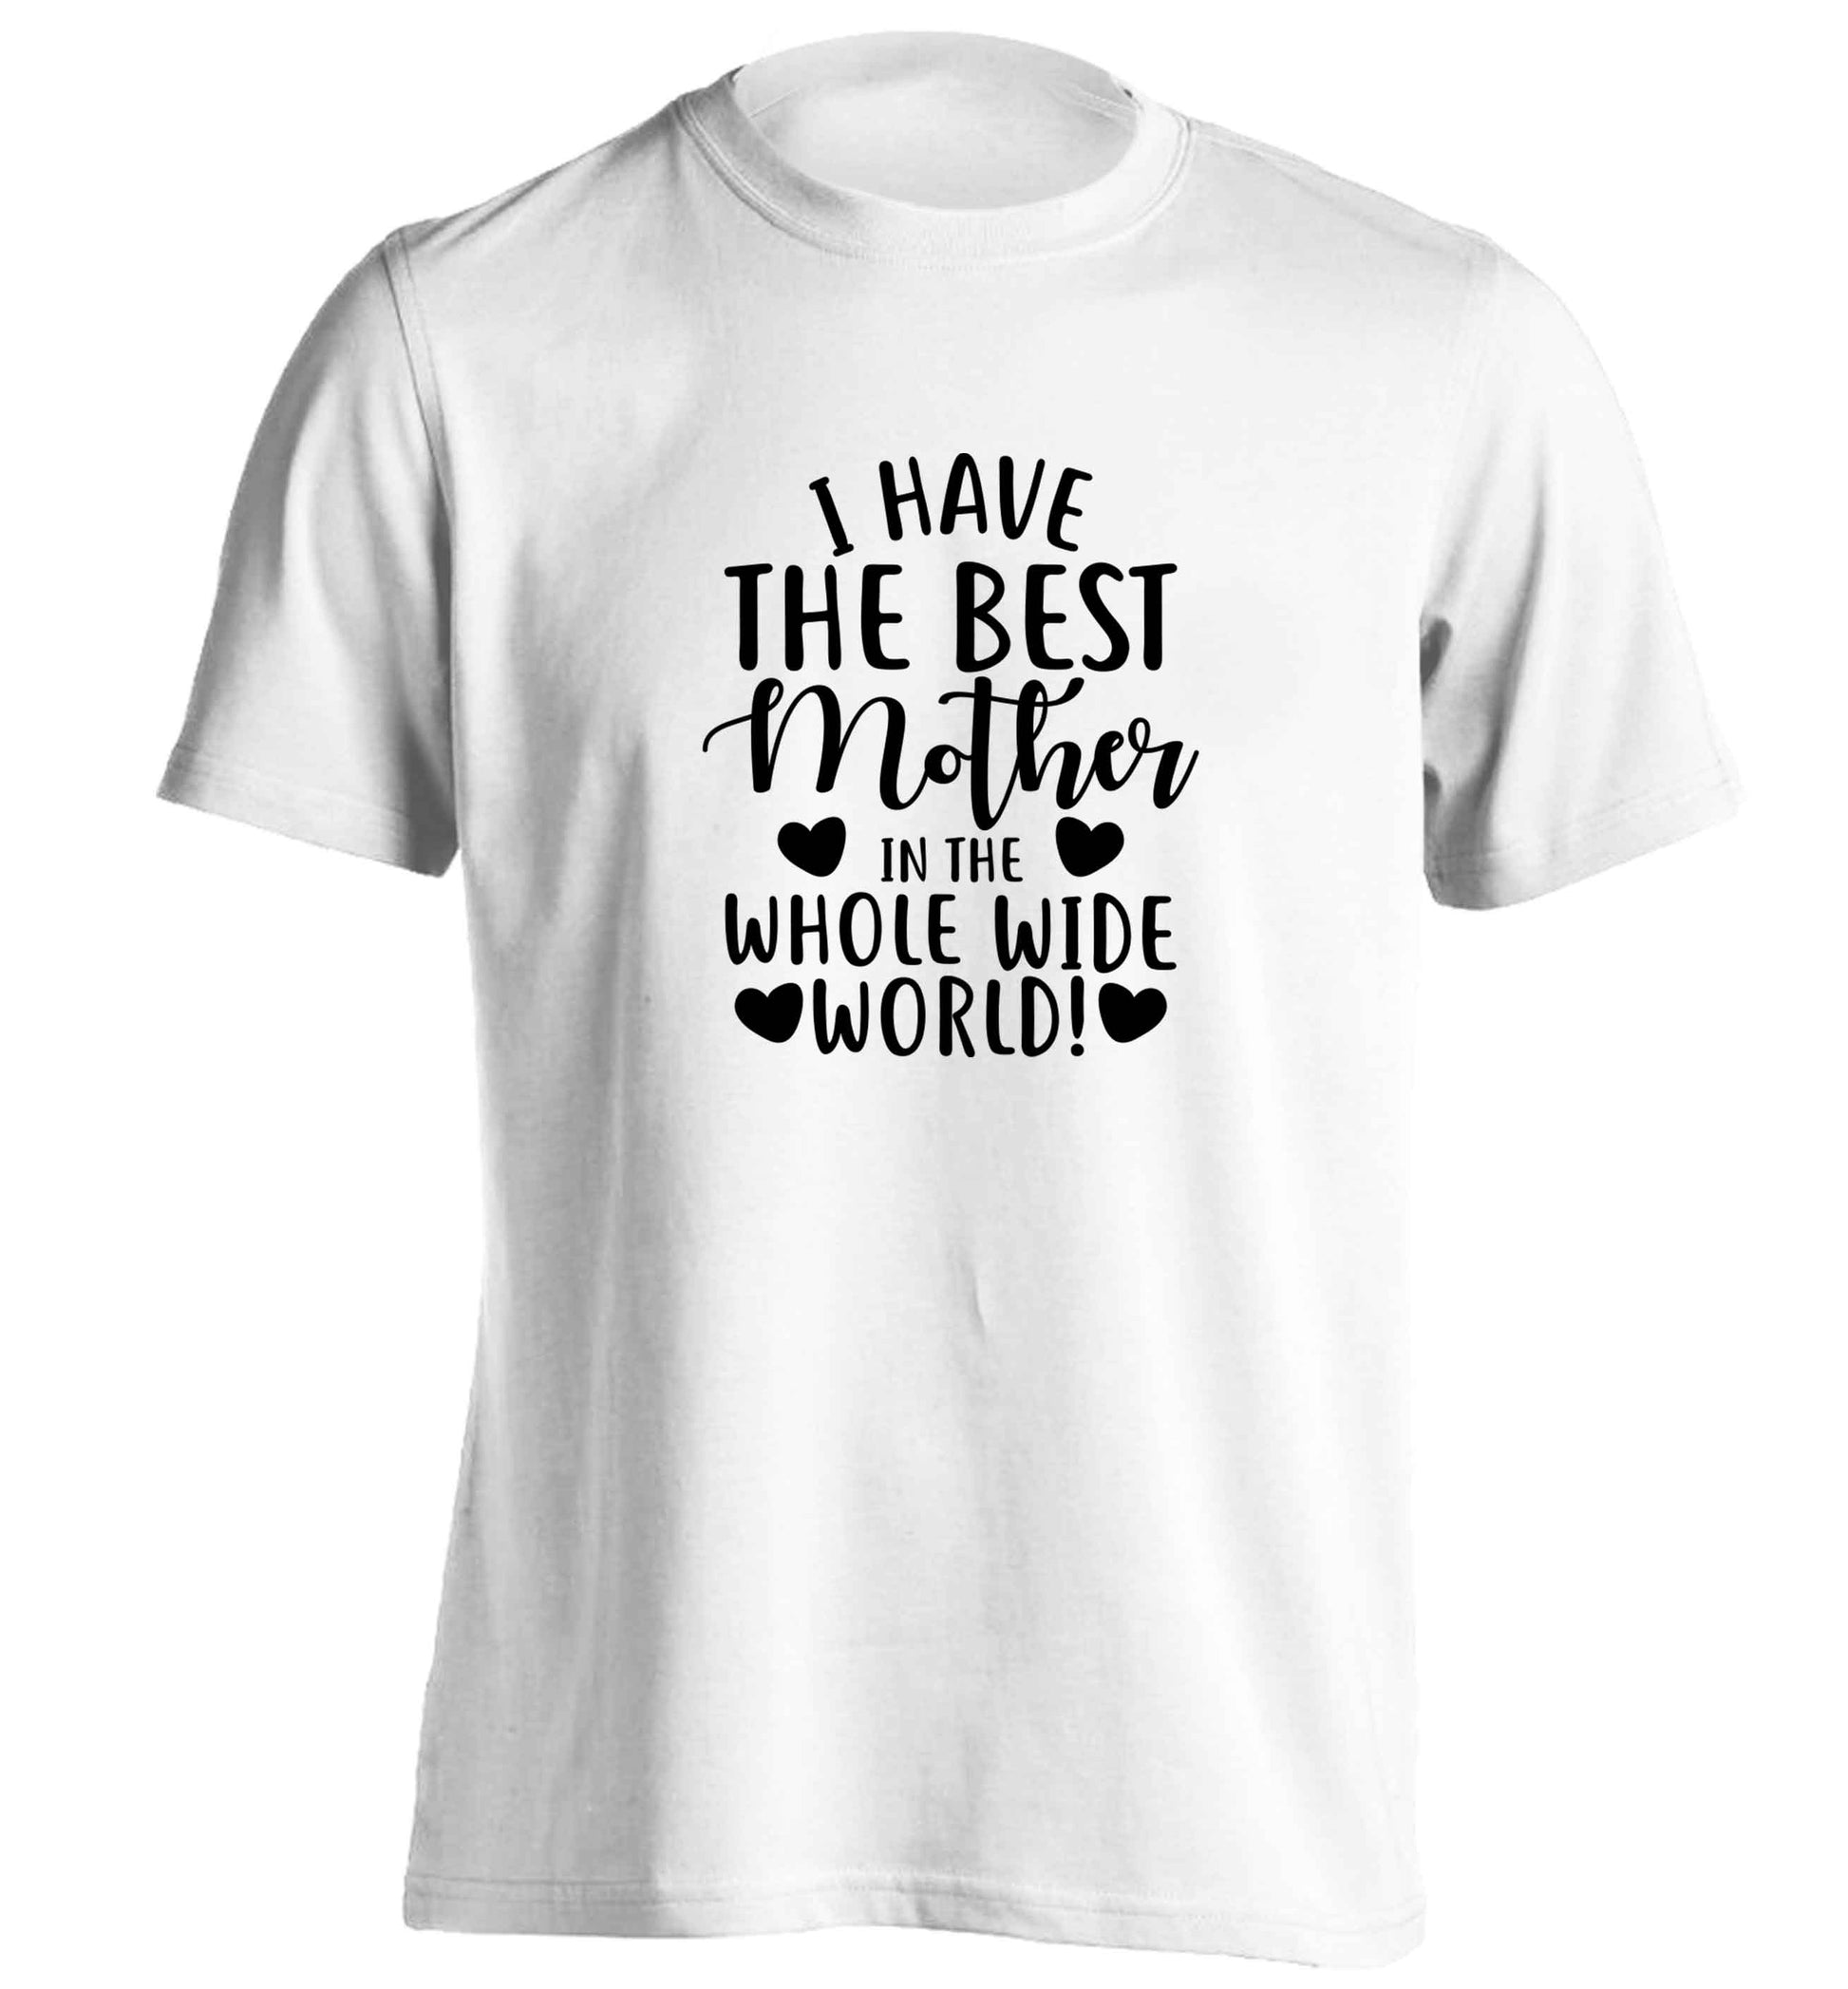 I have the best mother in the whole wide world adults unisex white Tshirt 2XL